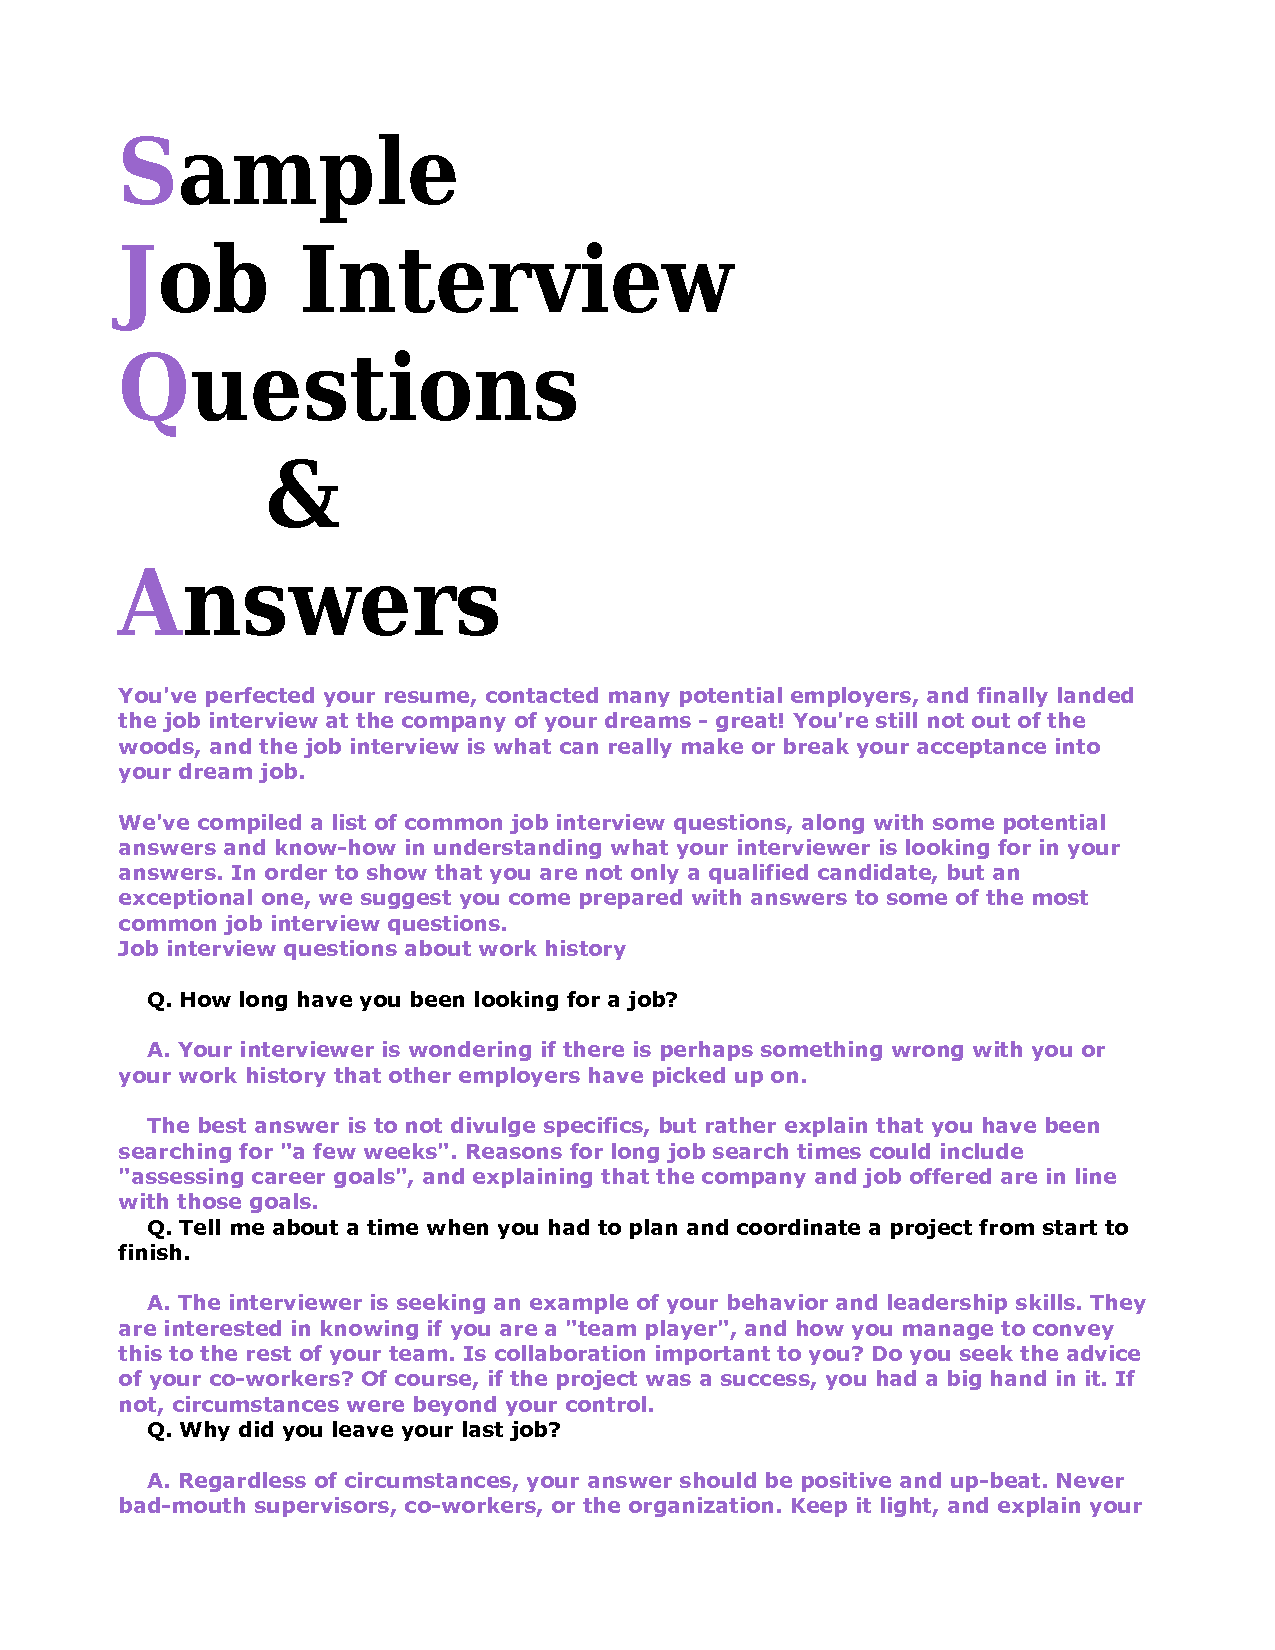 Interview questions for job interview and answers